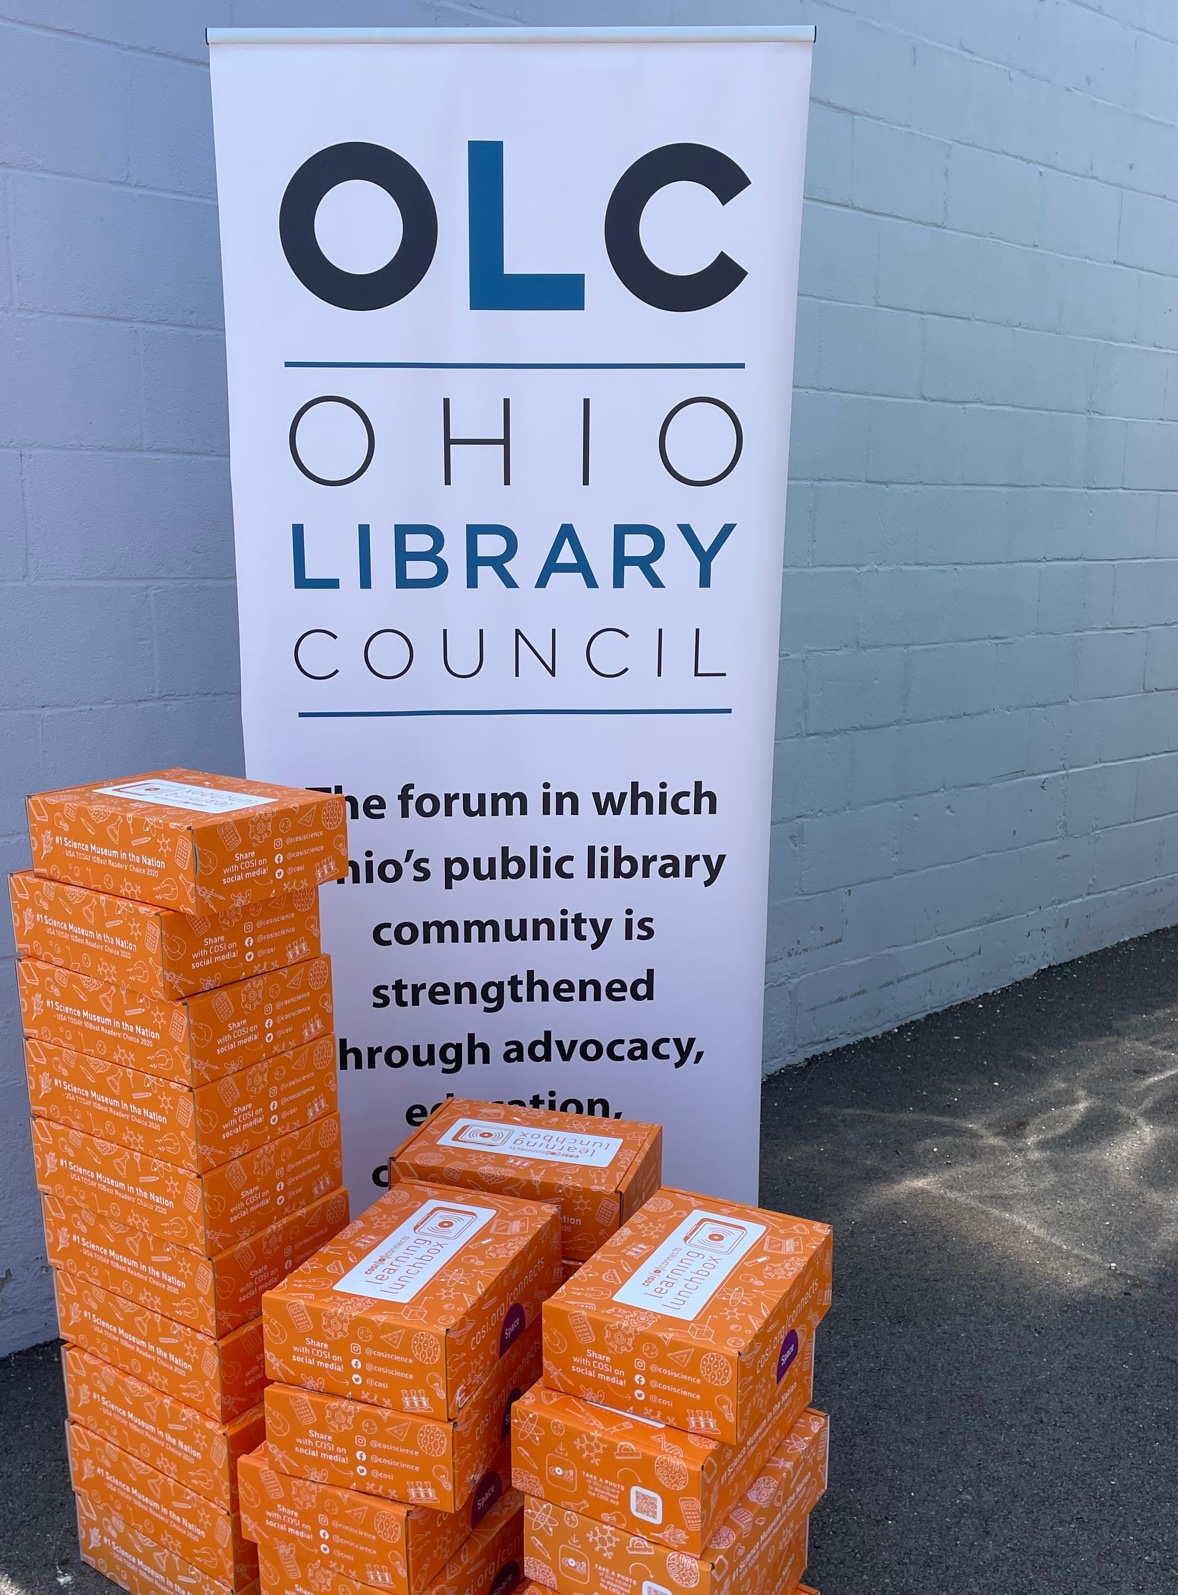 Ohio Libraries and COSI Team Up to Distribute Science Kits to Feed